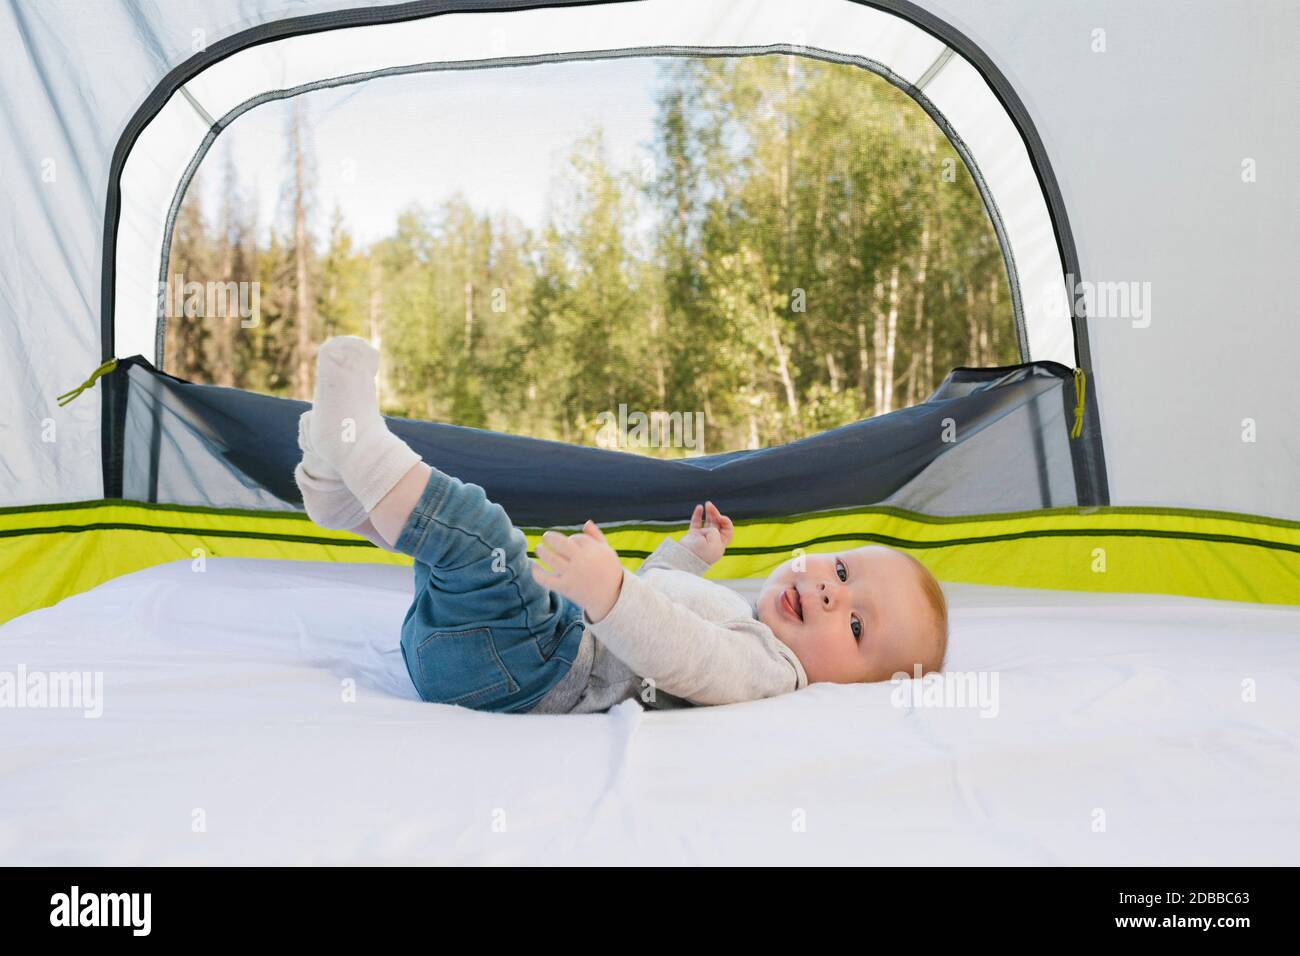 USA, Utah, Uinta National Park, Baby boy (6-11 months) lying in tent, forest in background Stock Photo